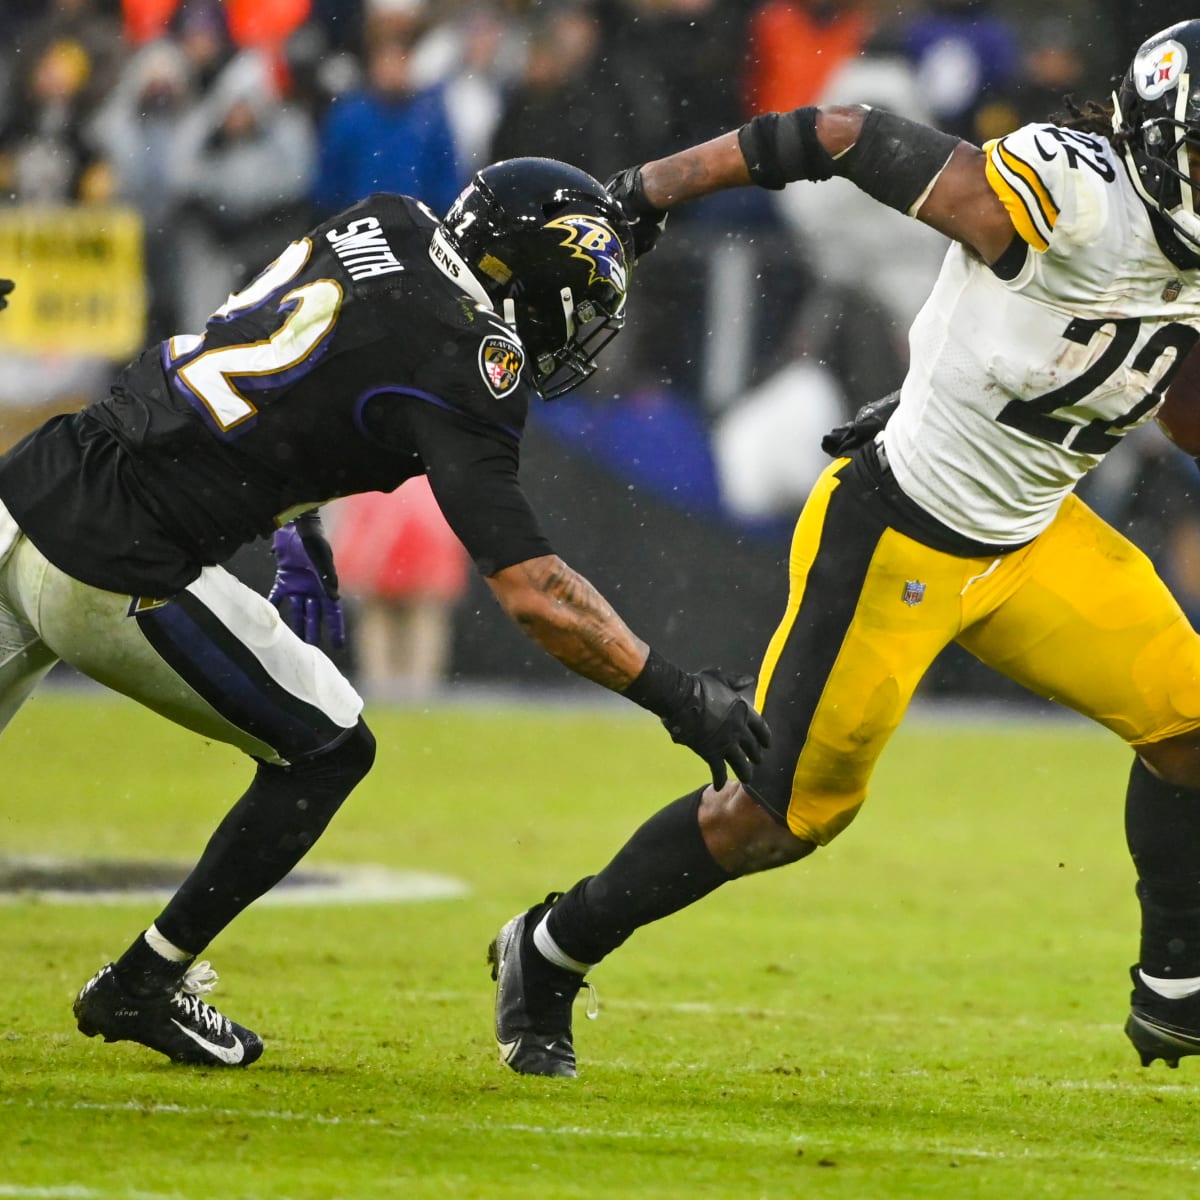 Steelers vs. Ravens live stream: TV channel, how to watch NFL this